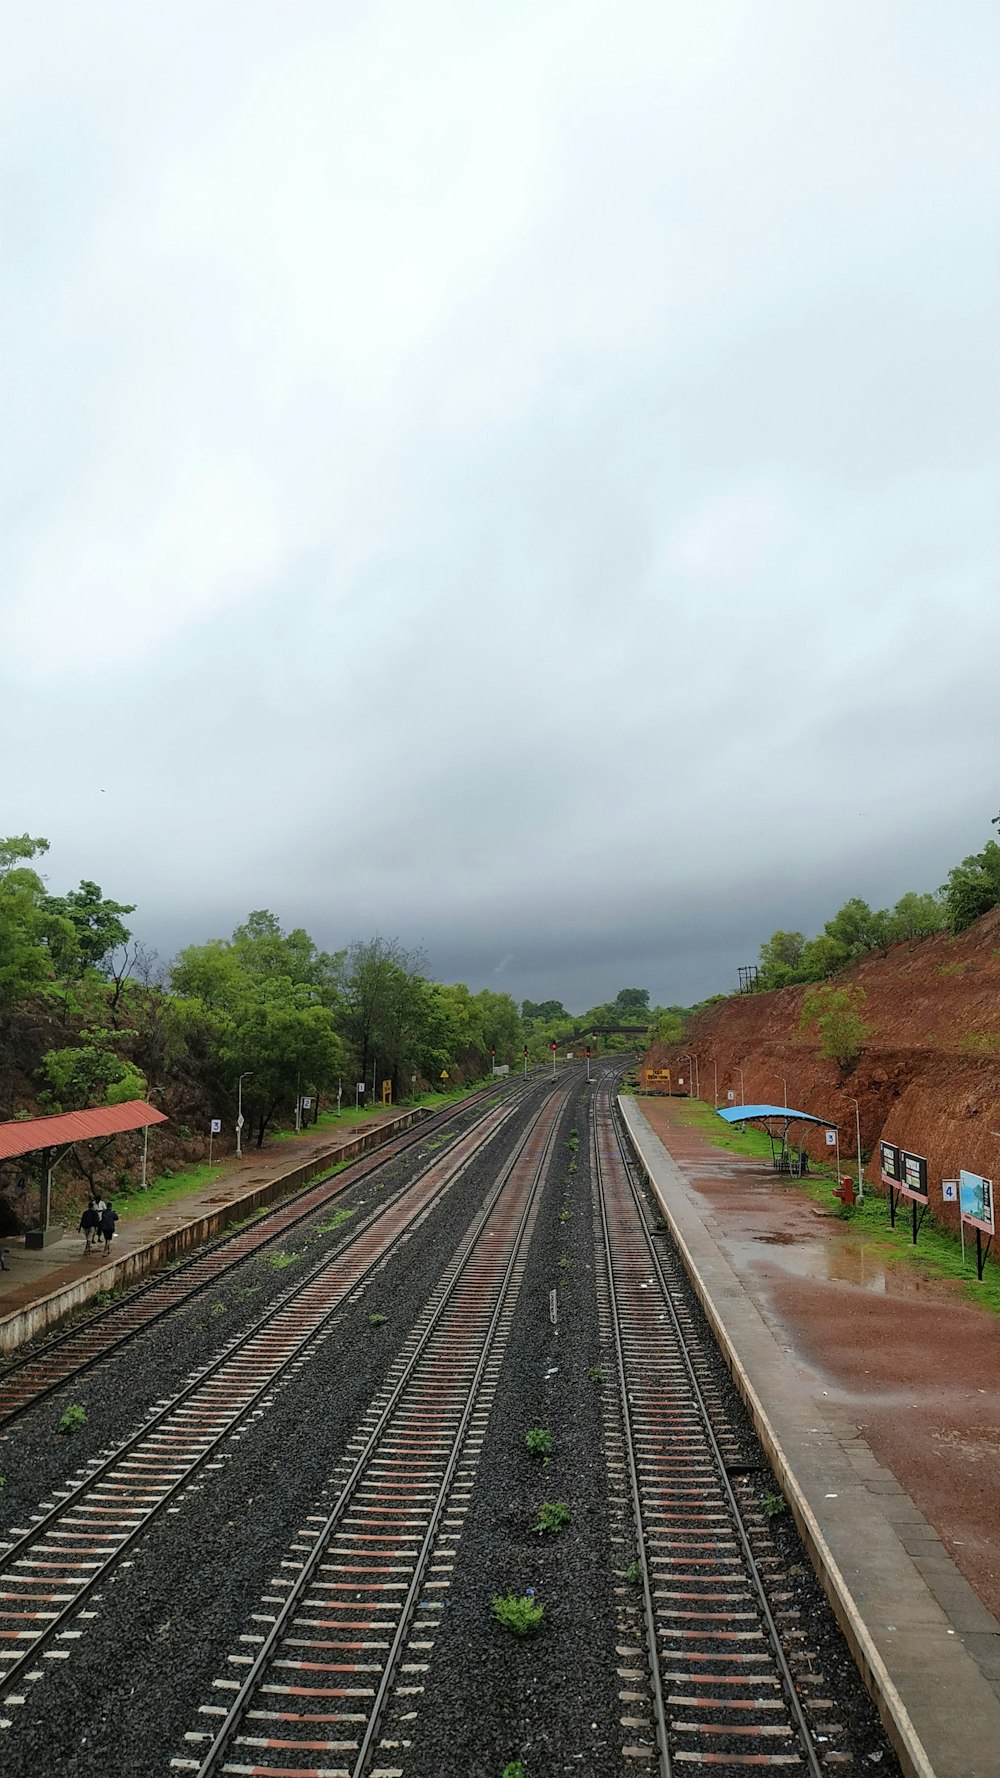 aerial photo of train track under cloudy sky